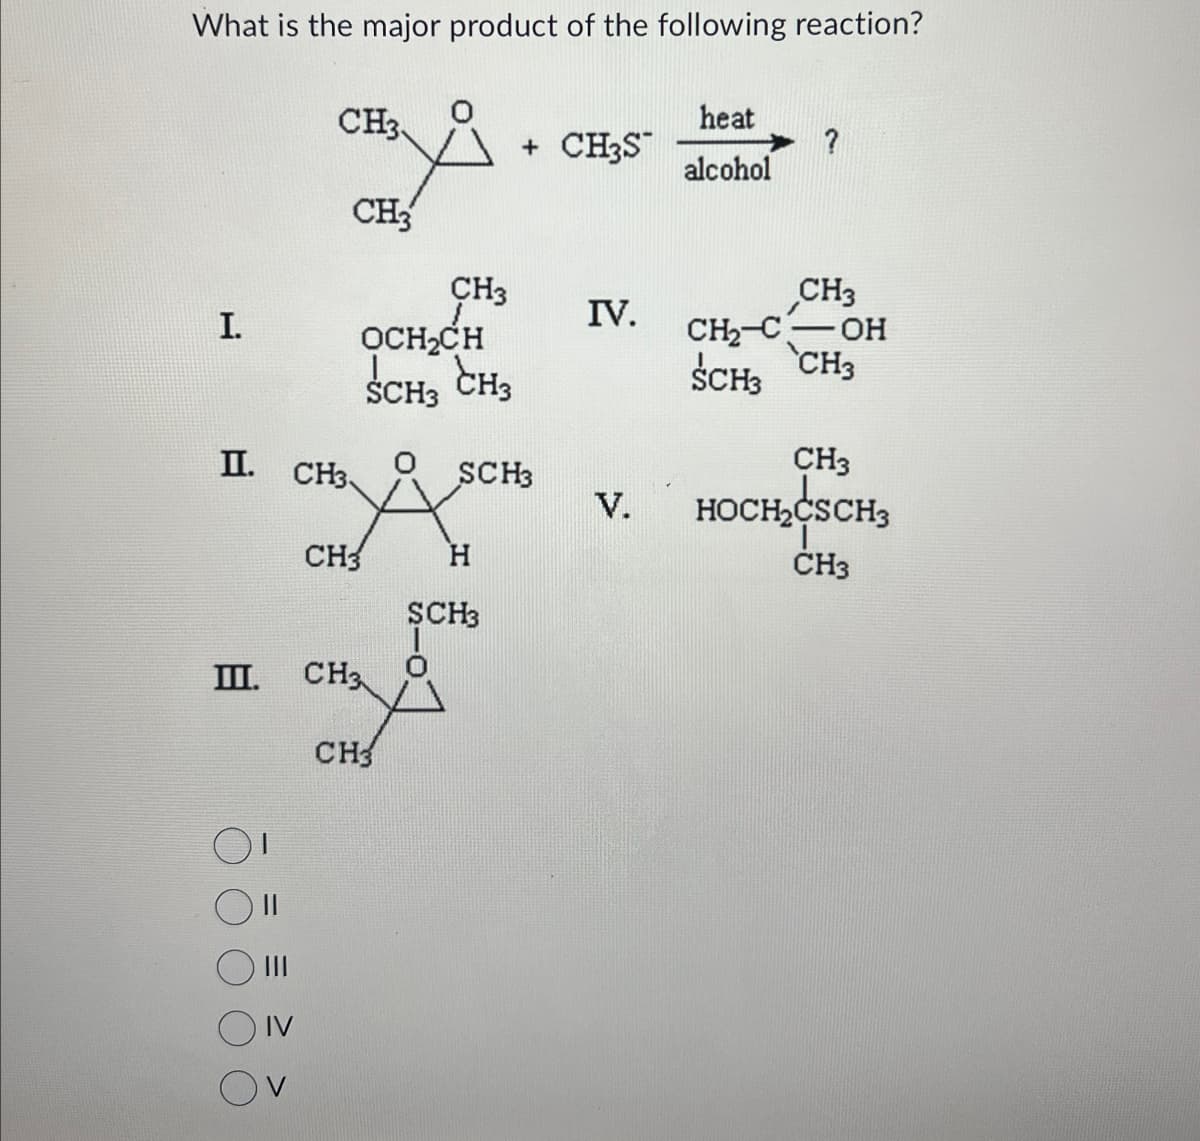 What is the major product of the following reaction?
I.
CH3
heat
+ CH3S
?
alcohol
CH3
CH3
CH3
IV.
OCH₂CH
SCH3 CH3
CH2-C OH
SCH3 CH3
CH3
II.
CH3
SCH3
V.
HOCH₂CSCH3
CH3
H
CH3
SCH3
III.
CH3
CH3
III
IV